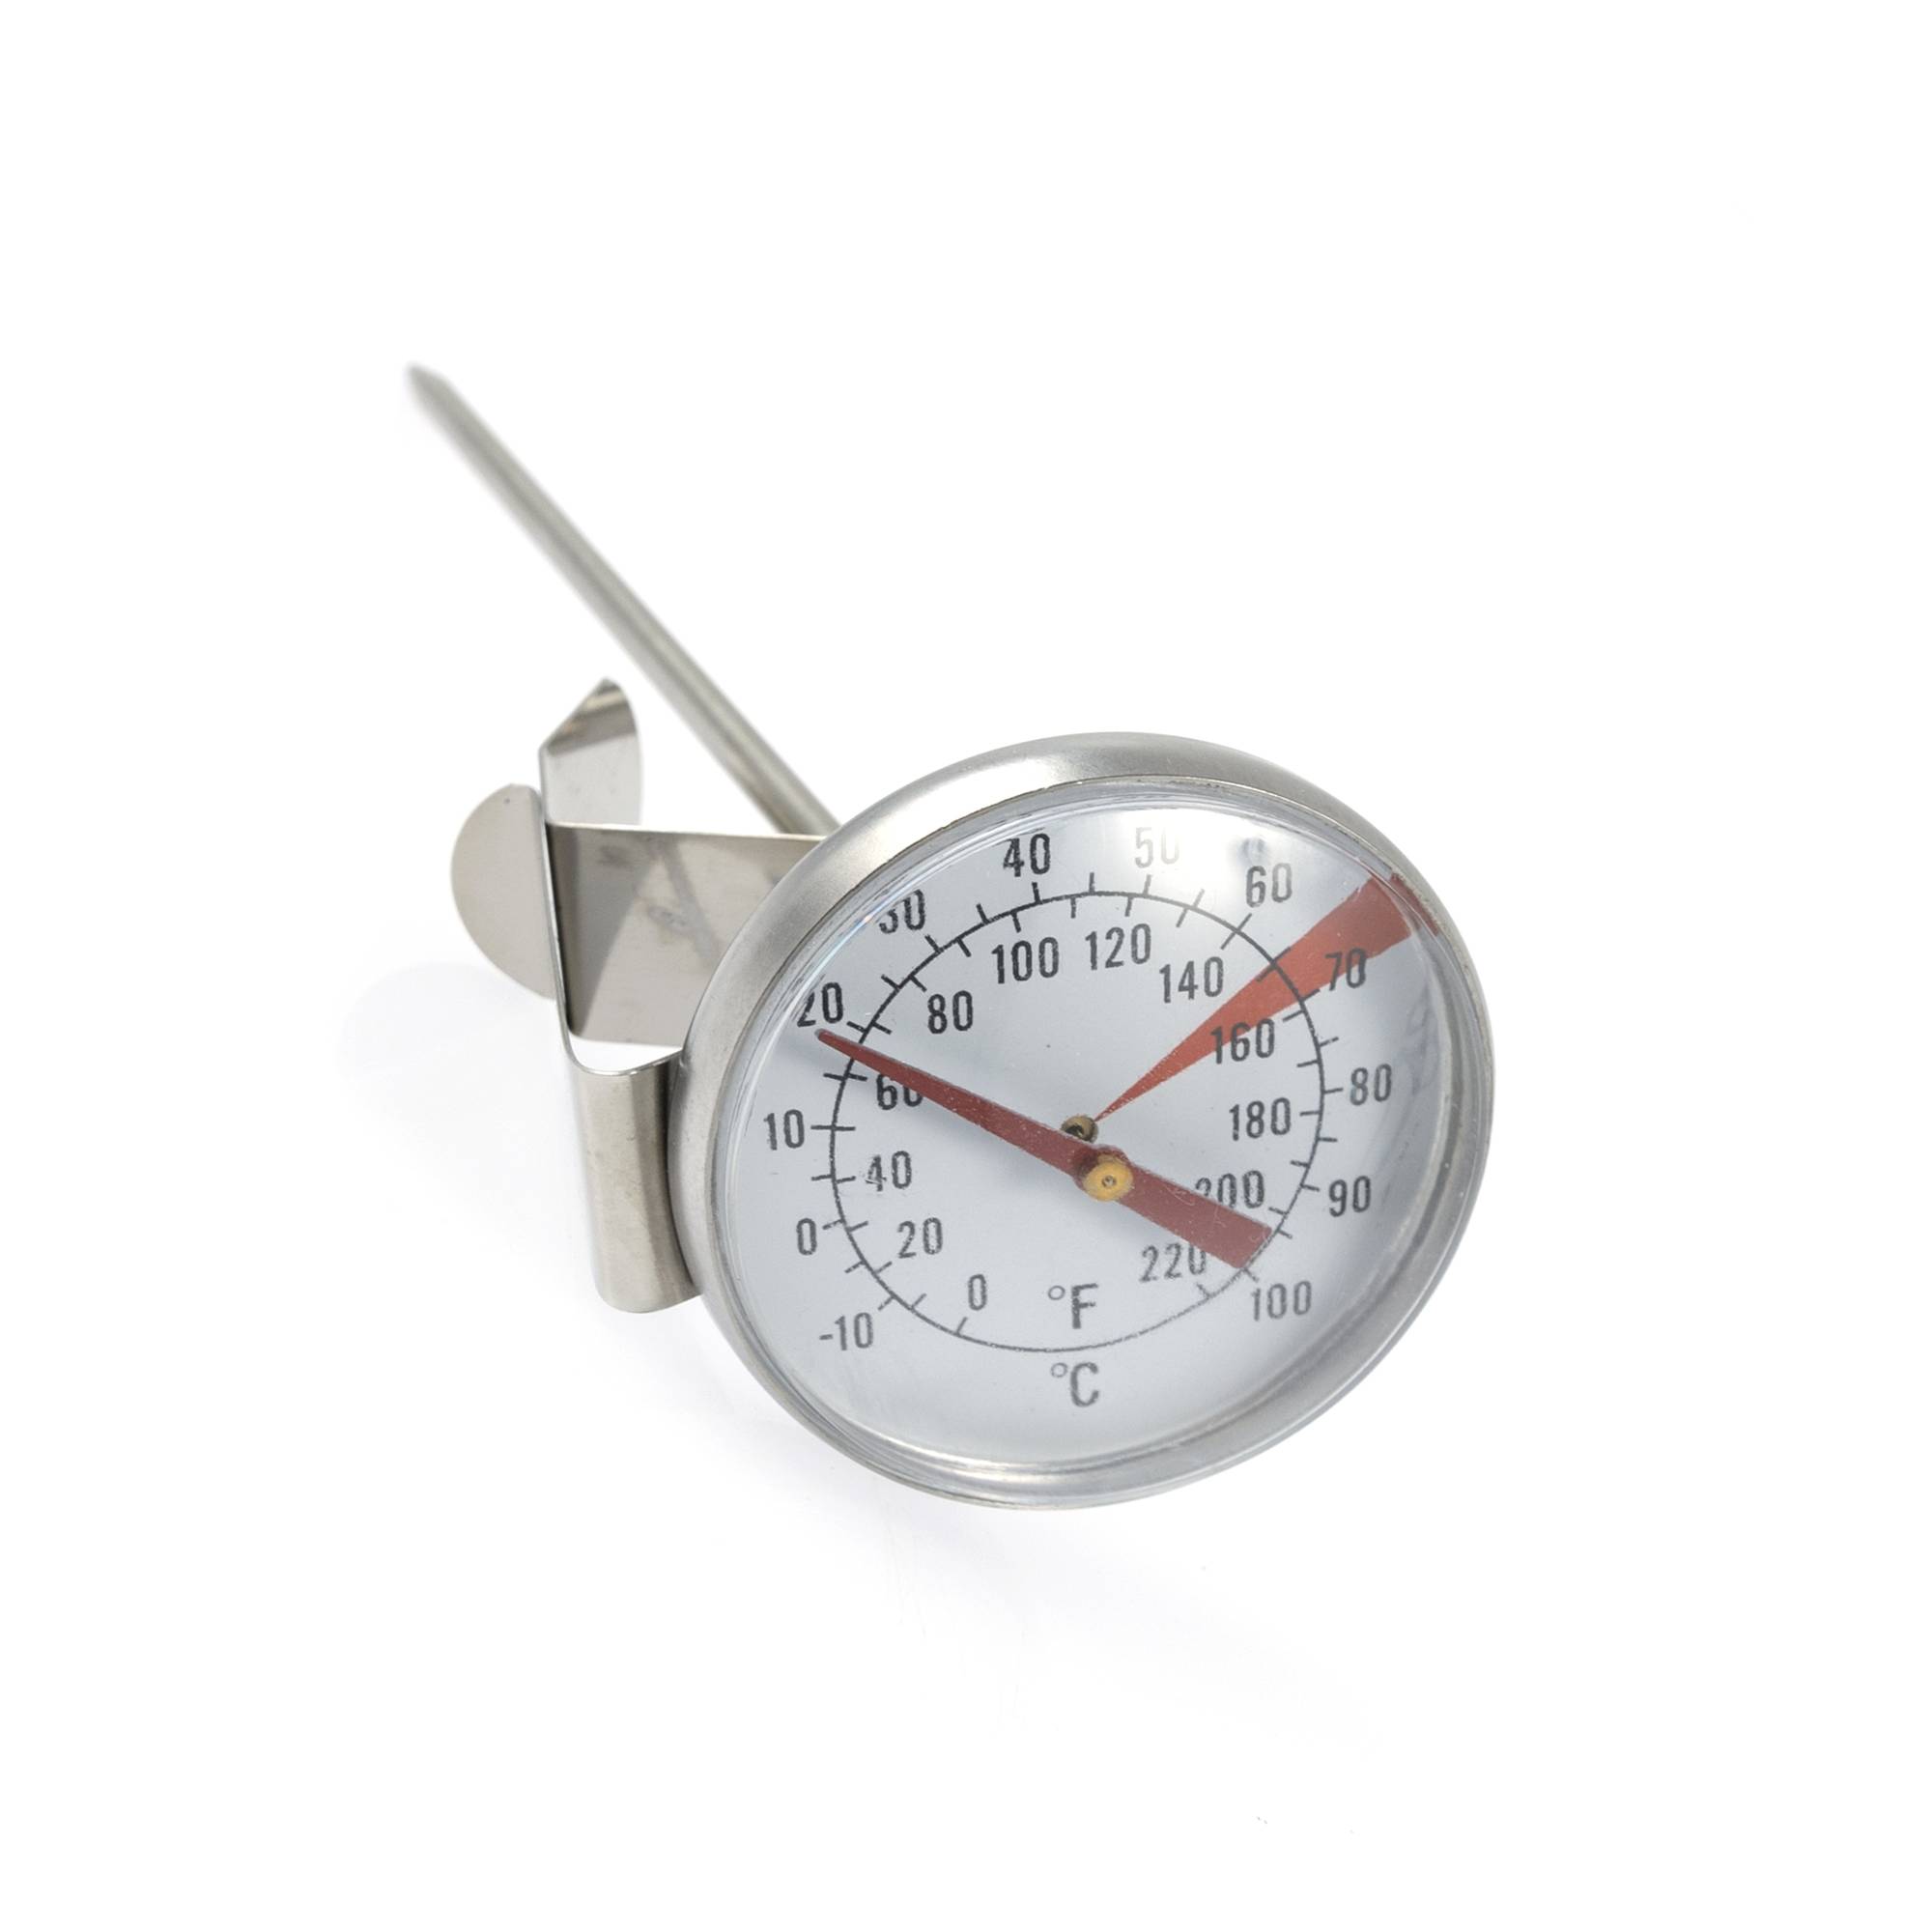 https://www.hobbycraft.co.uk/on/demandware.static/-/Sites-hobbycraft-uk-master/default/dw12388d1c/images/large/666161_1000_1_-candle-making-thermometer-silver-colour.jpg